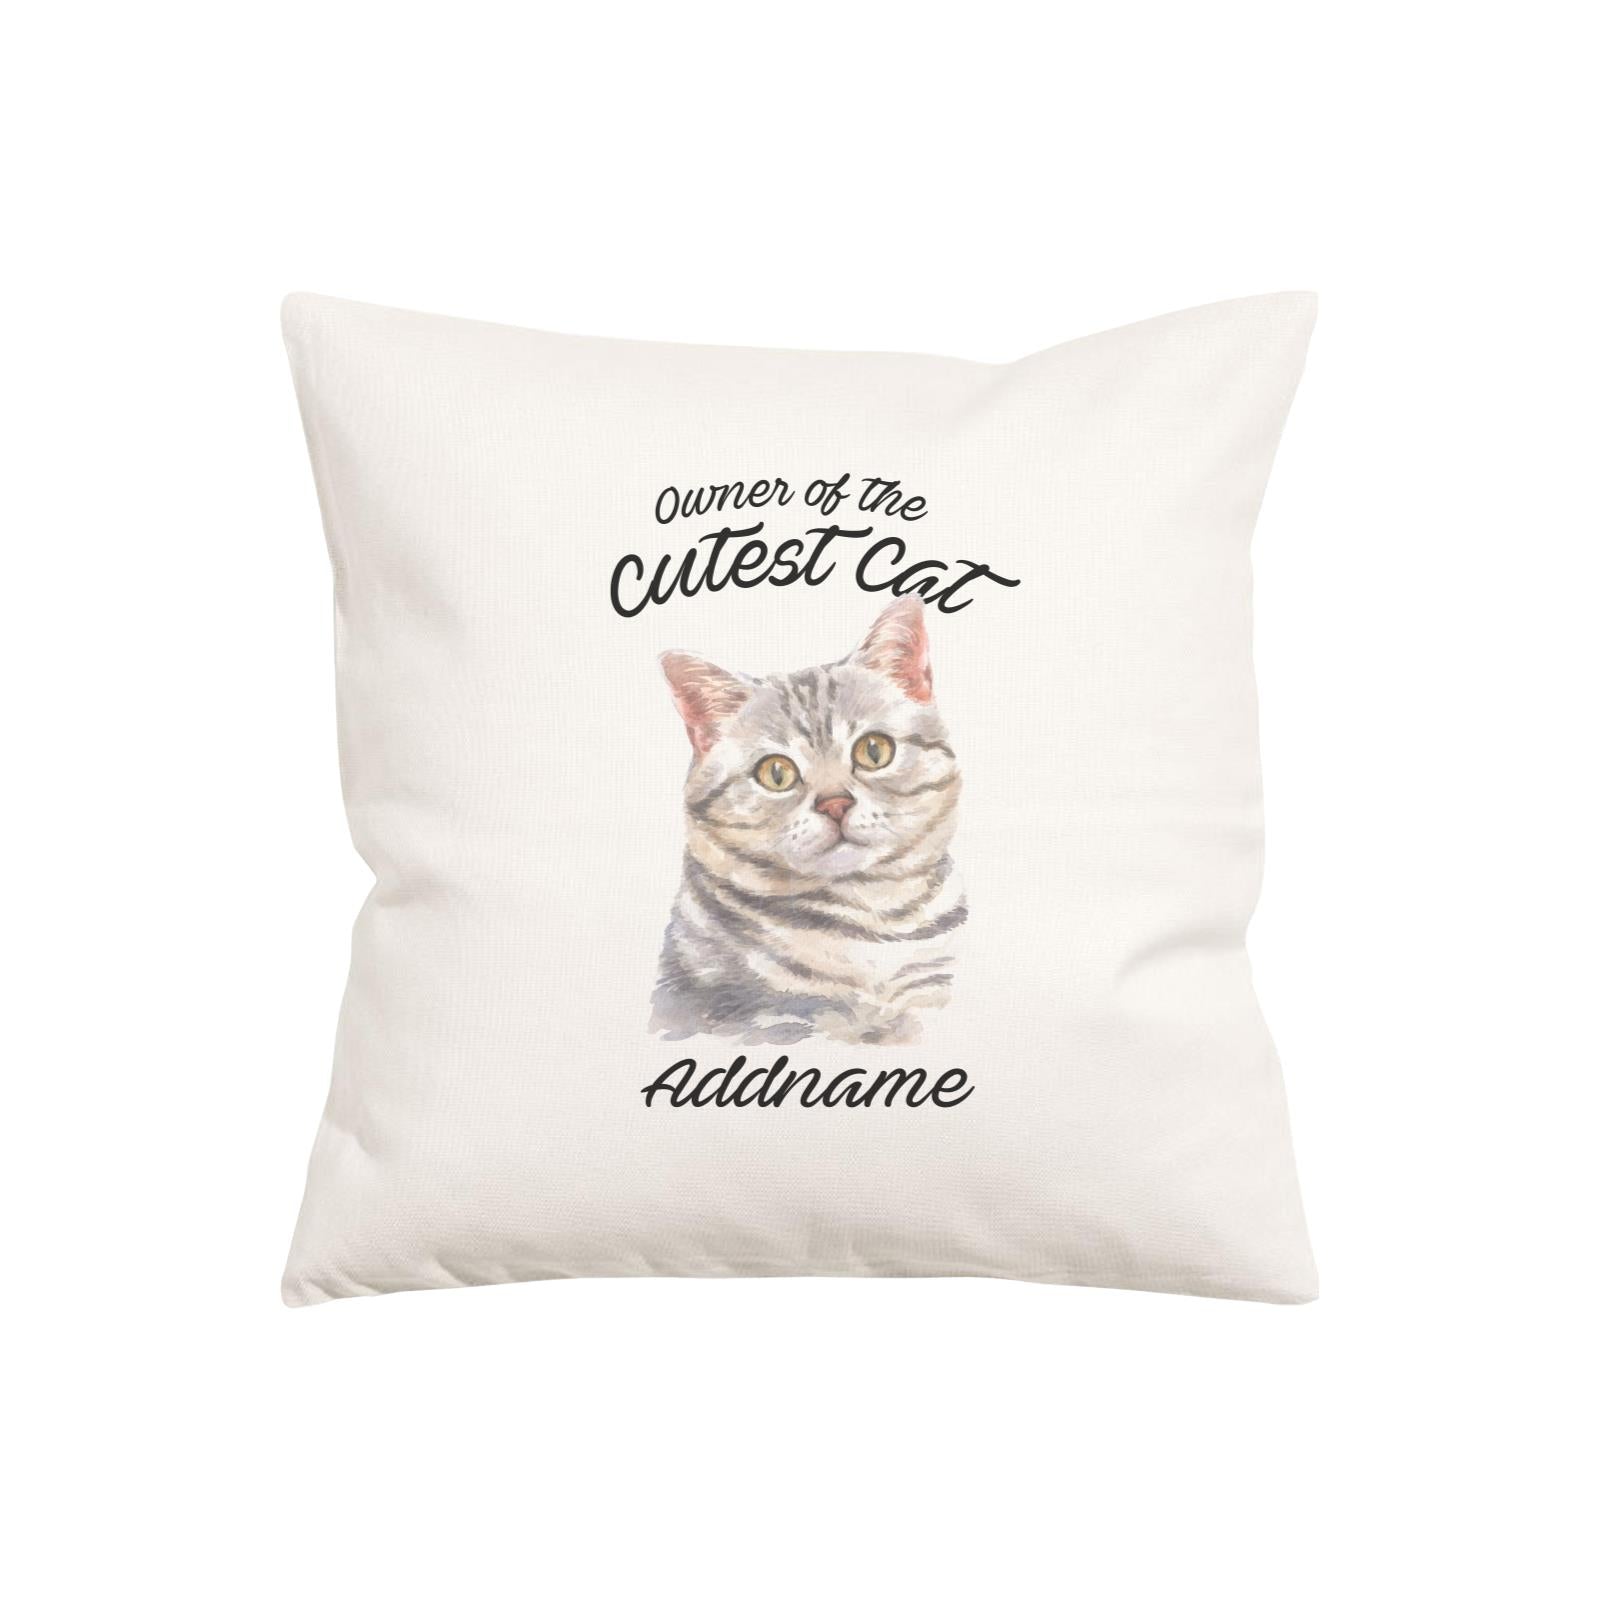 Watercolor Owner Of The Cutest Cat Grey American Shorthair Addname Pillow Cushion